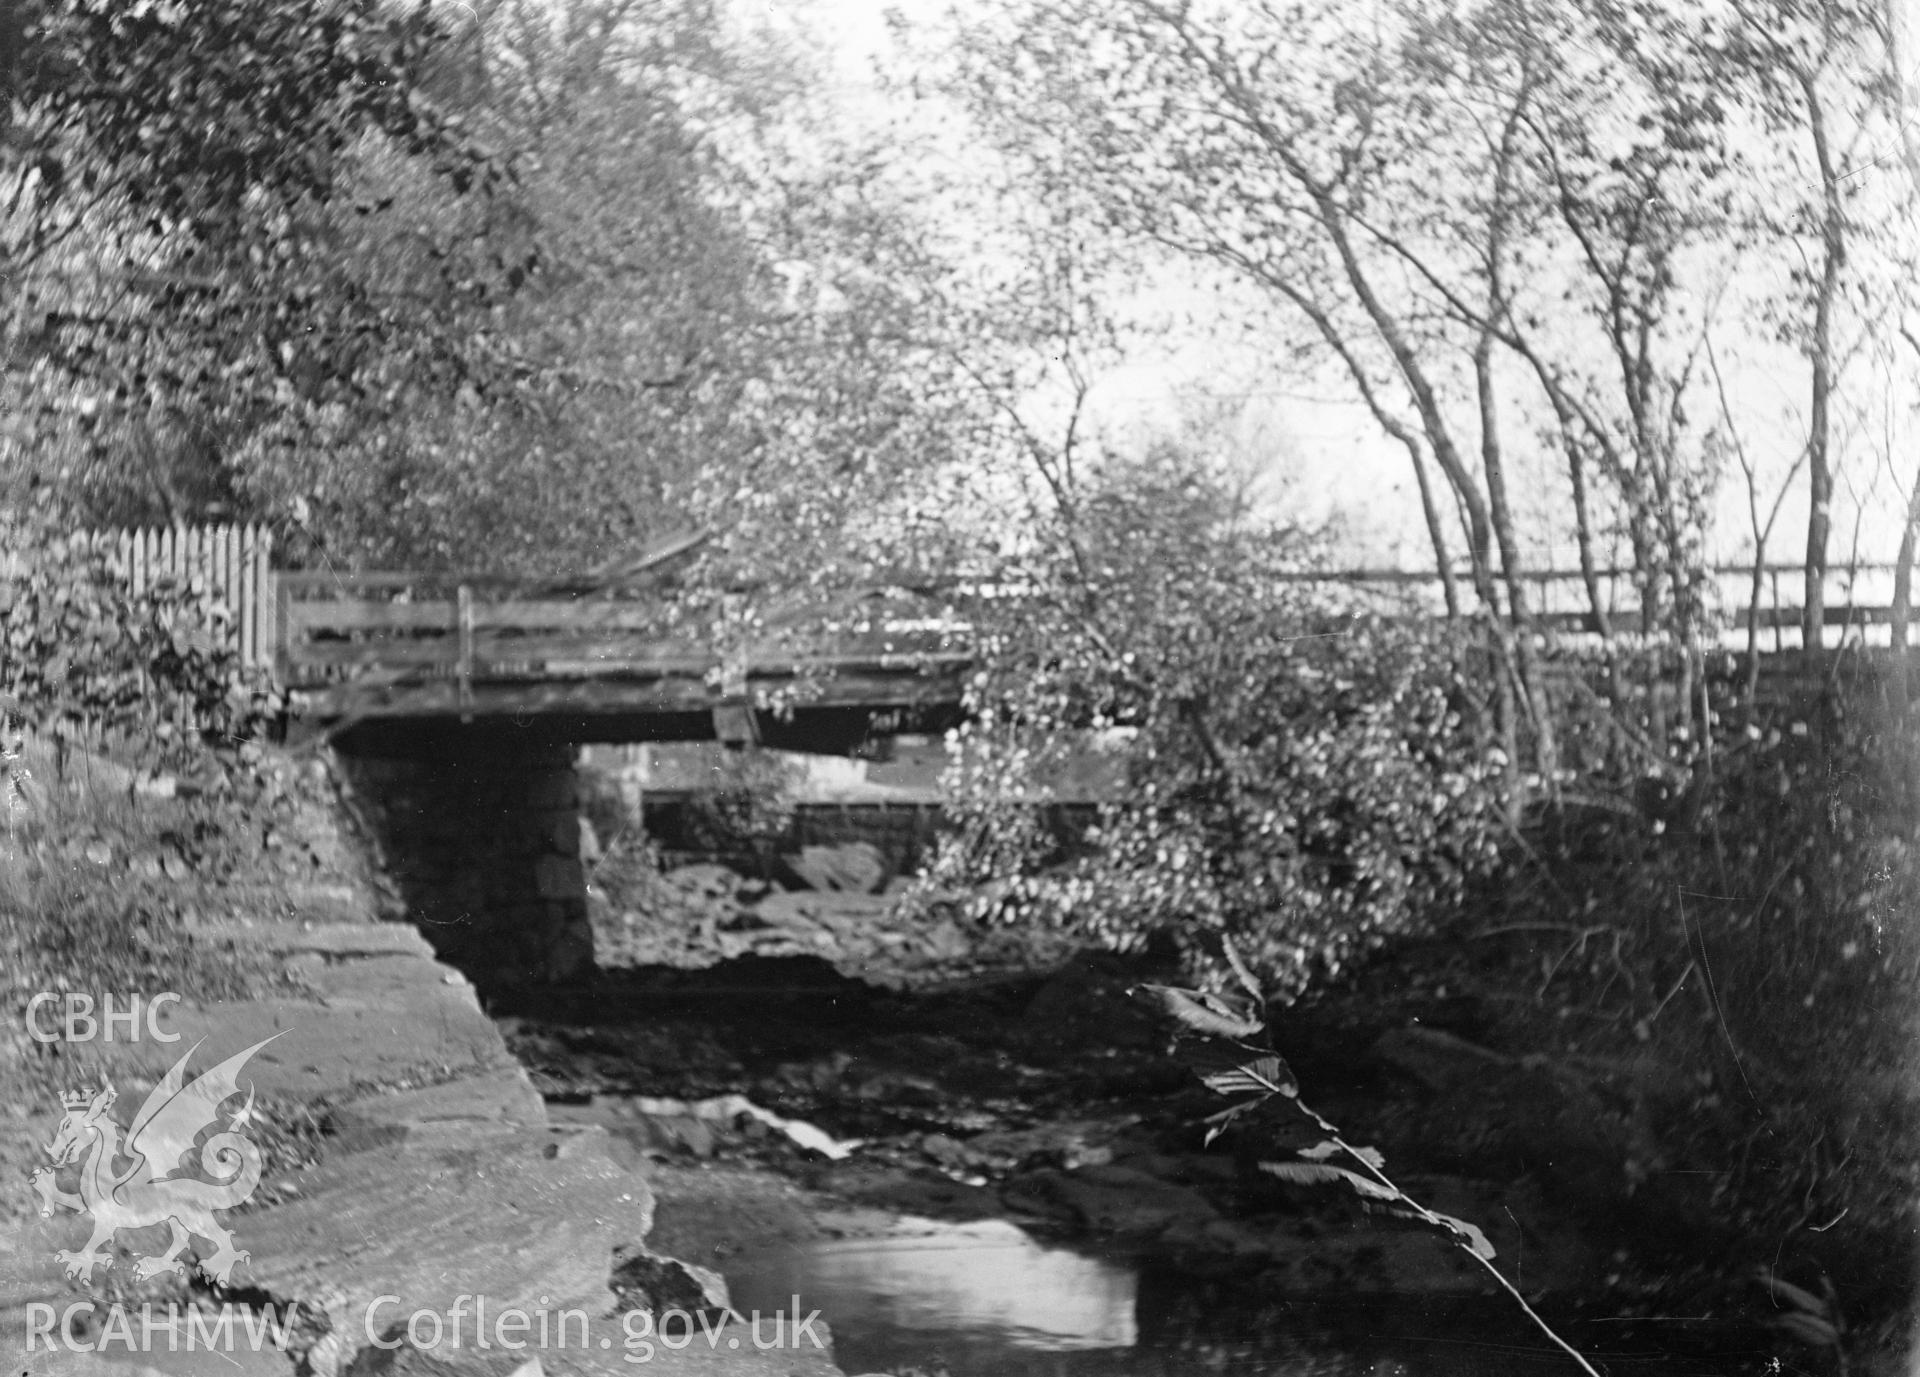 Digital copy of a glass plate showing view of bridge in the Fairy Glen at Trefriw, taken by Manchester-based amateur photographer A. Rothwell, 1890-1910